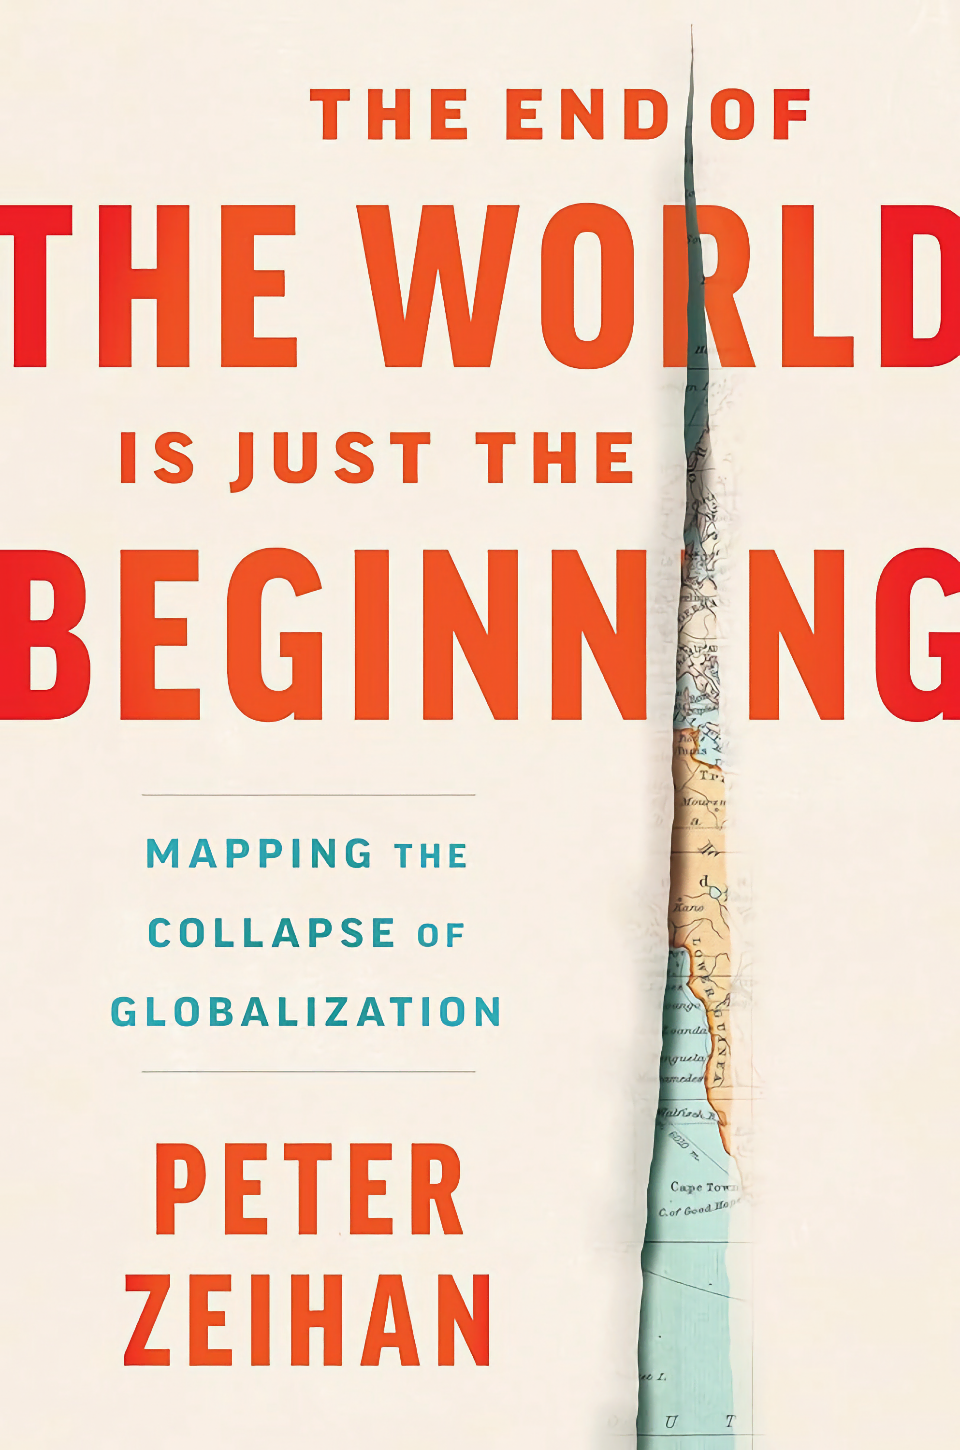 The End of the World Is Just the Beginning: Mapping the Collapse of Globalization by Peter Zeihan finished on 2023 Dec 3